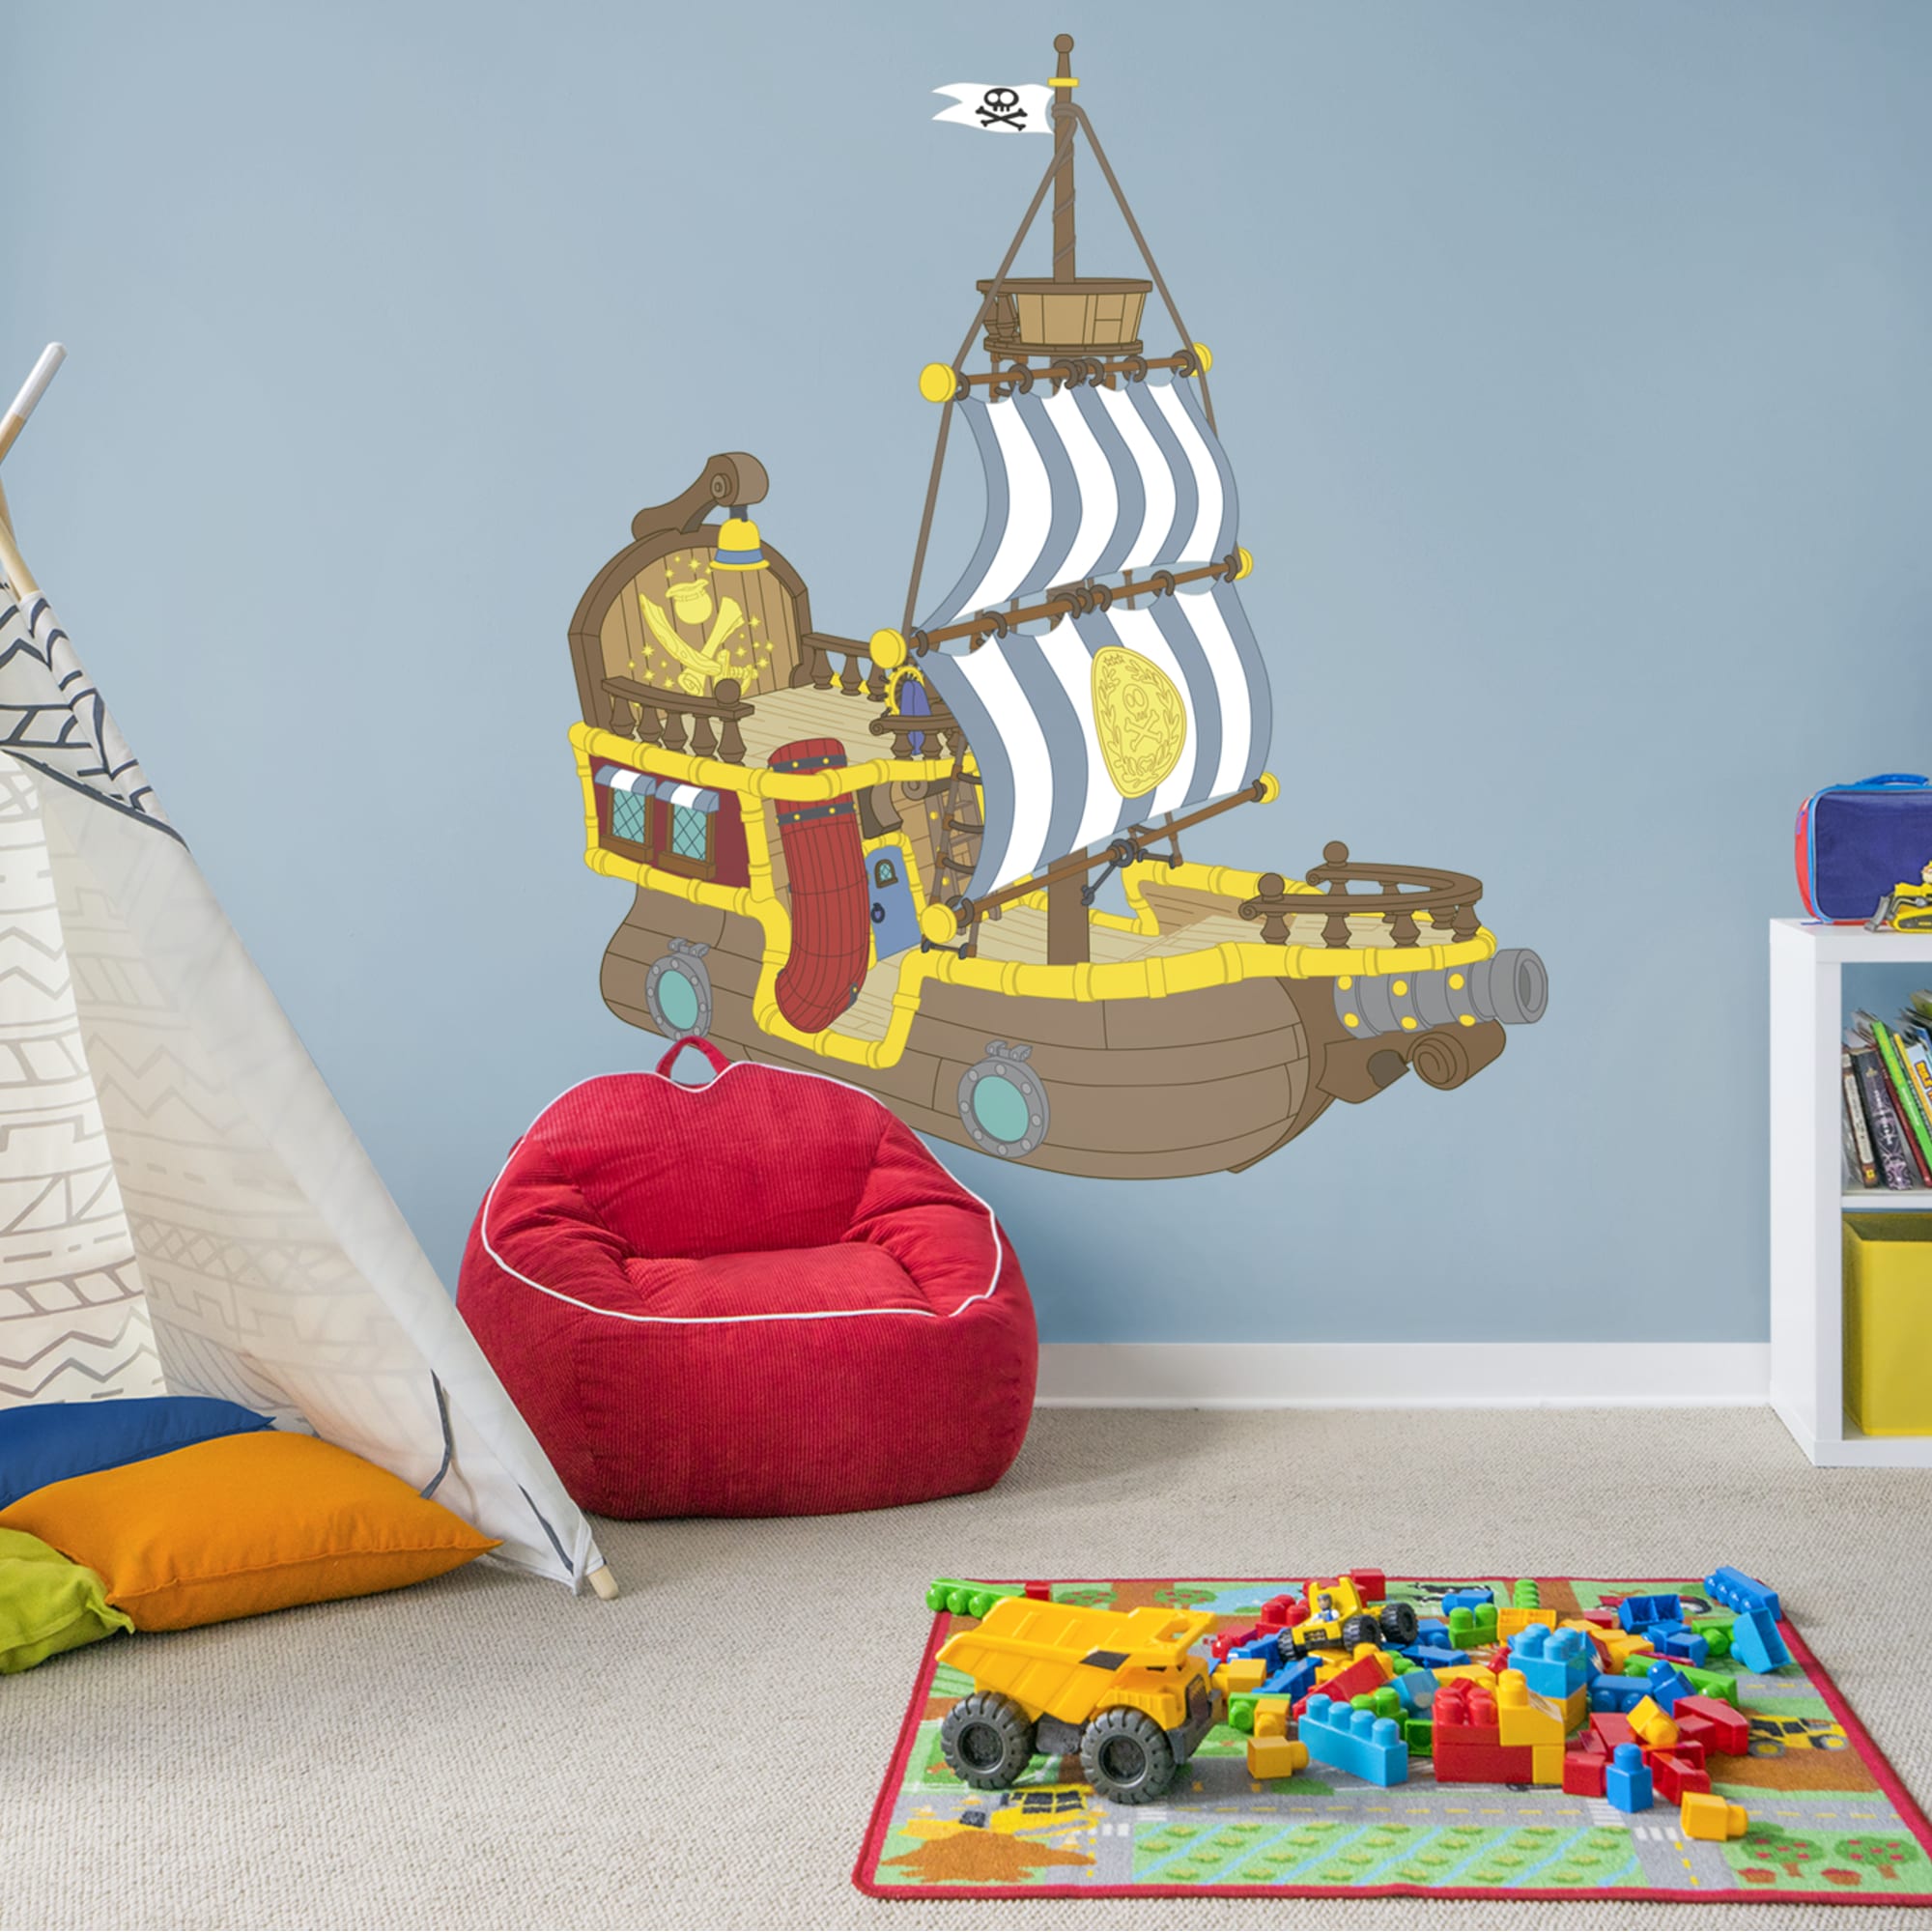 Jake and the Neverland Pirates: Bucky the Pirate Ship - Officially Licensed Disney Removable Wall Decal 59.0"W x 69.0"H by Fathe